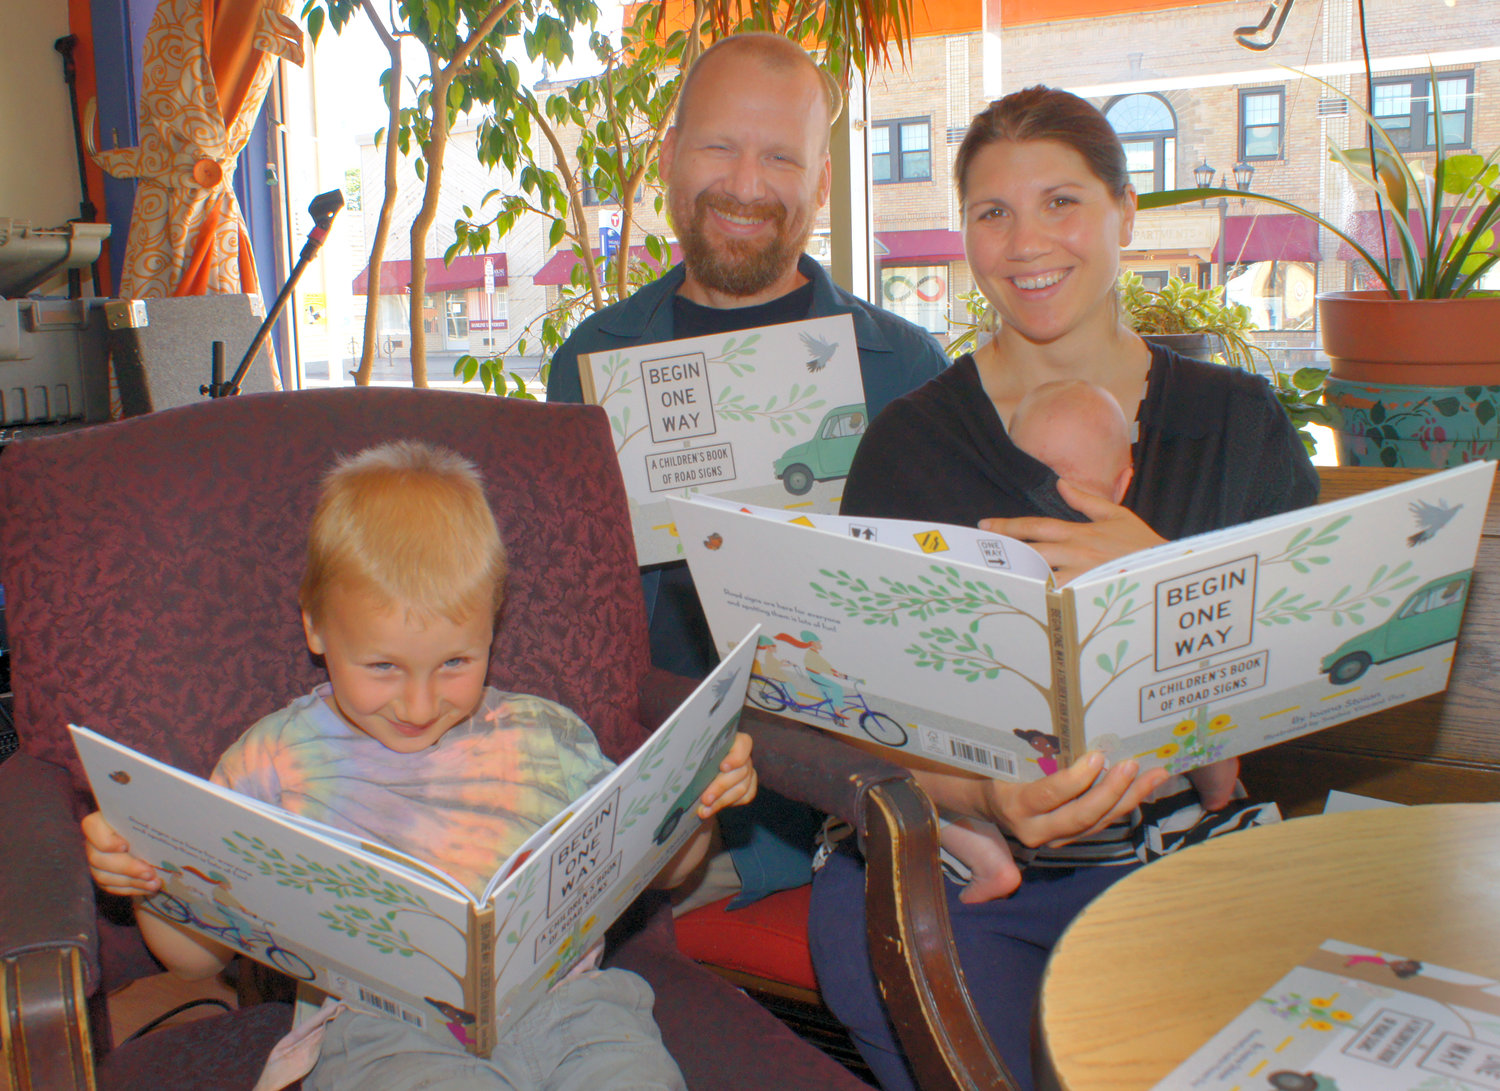 On June 18, Ioana Stoian presented her new book, “Begin One Way: A Children’s Book of Road Signs” at the Gingko Coffee Shop. With her were her husband Eric, 5-year-old son George (aka Biff), and nine-week-old daughter Lydia. (Photo by Terry Faust)